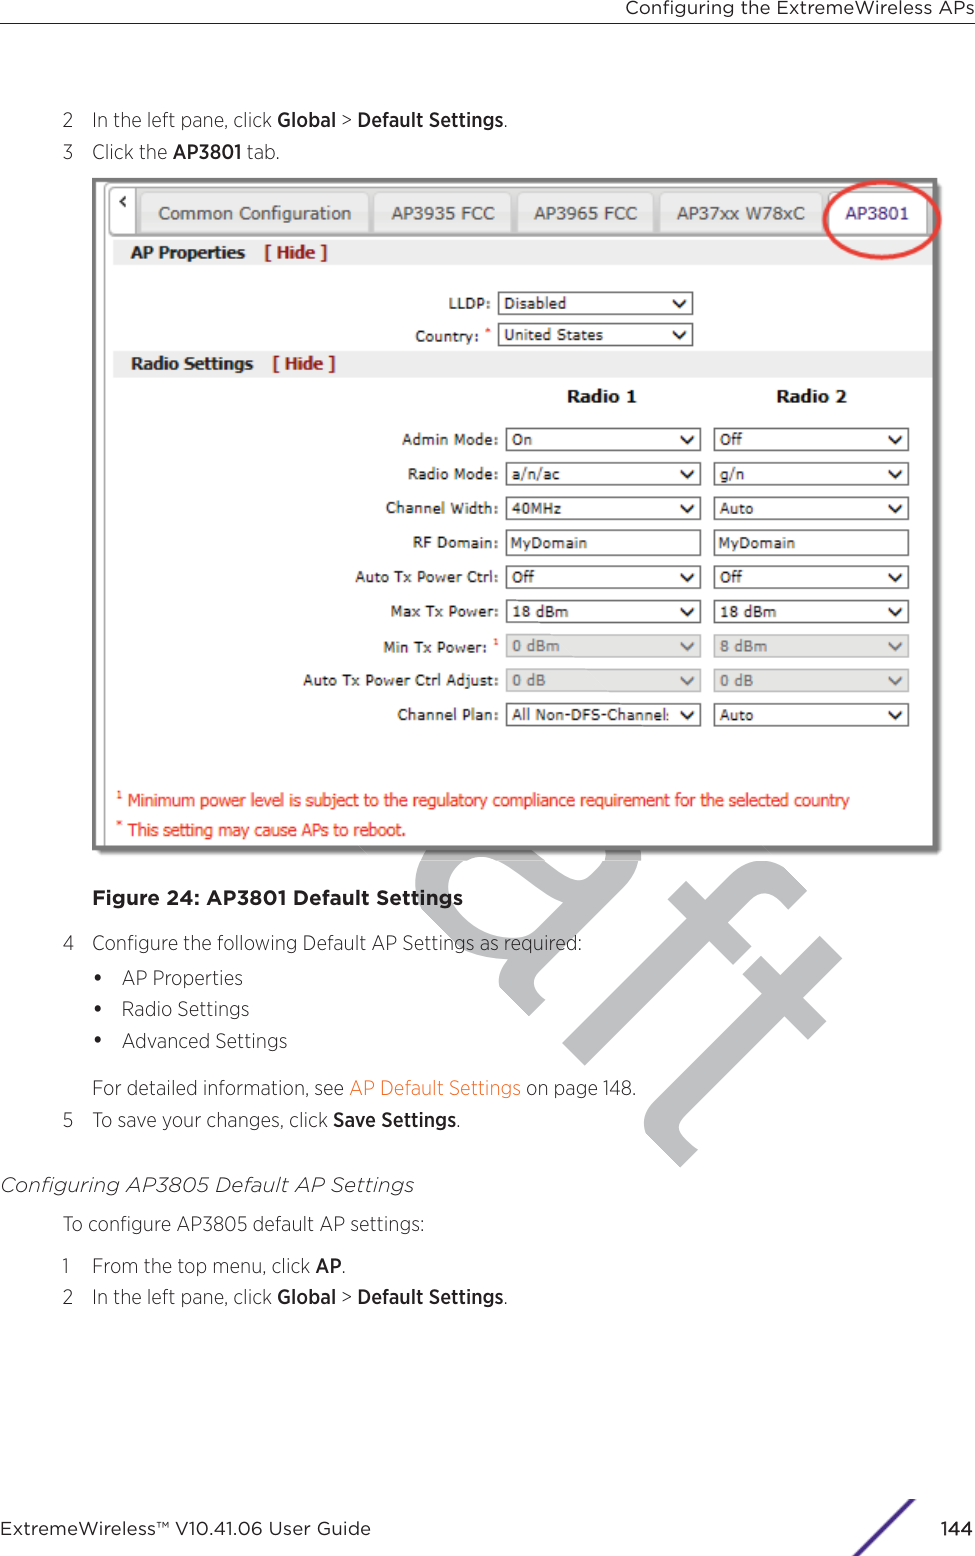 raft2 In the left pane, click Global &gt; Default Settings.3 Click the AP3801 tab.Figure 24: AP3801 Default Settings4 Conﬁgure the following Default AP Settings as required:•AP Properties•Radio Settings•Advanced SettingsFor detailed information, see AP Default Settings on page 148.5 To save your changes, click Save Settings.Conﬁguring AP3805 Default AP SettingsTo conﬁgure AP3805 default AP settings:1 From the top menu, click AP.2 In the left pane, click Global &gt; Default Settings.Conﬁguring the ExtremeWireless APsExtremeWireless™ V10.41.06 User Guide 1144